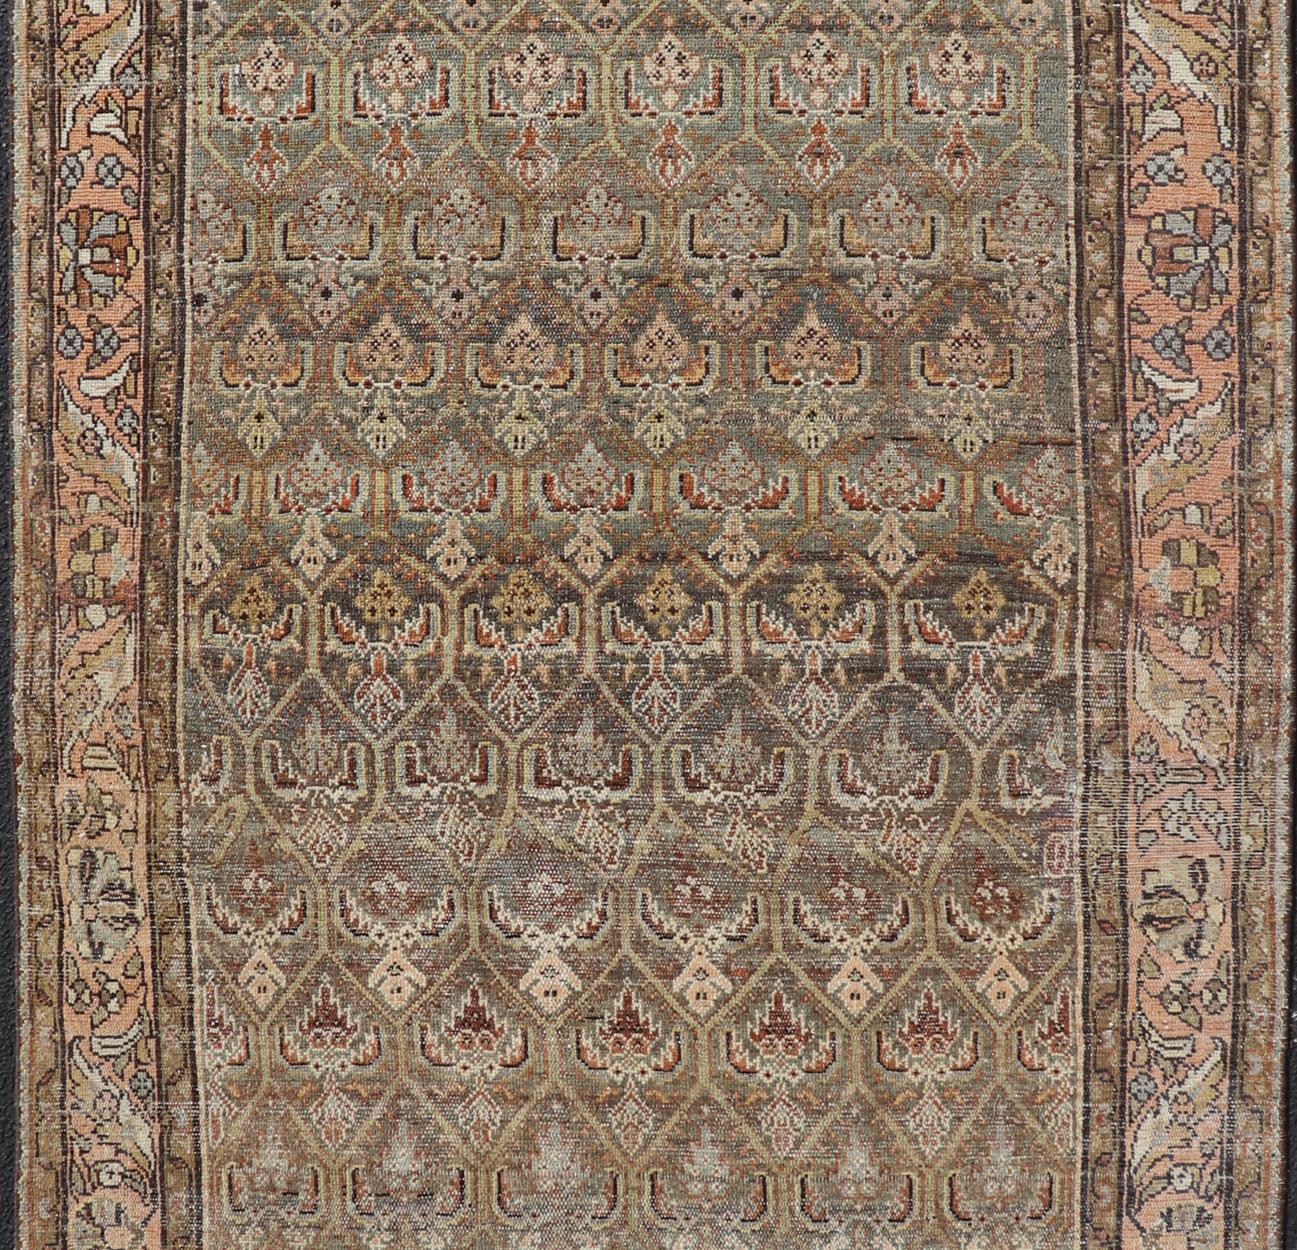 Kurdish Antique Gallery Runner with All-Over Tribal Design in Brown's and Pink For Sale 3